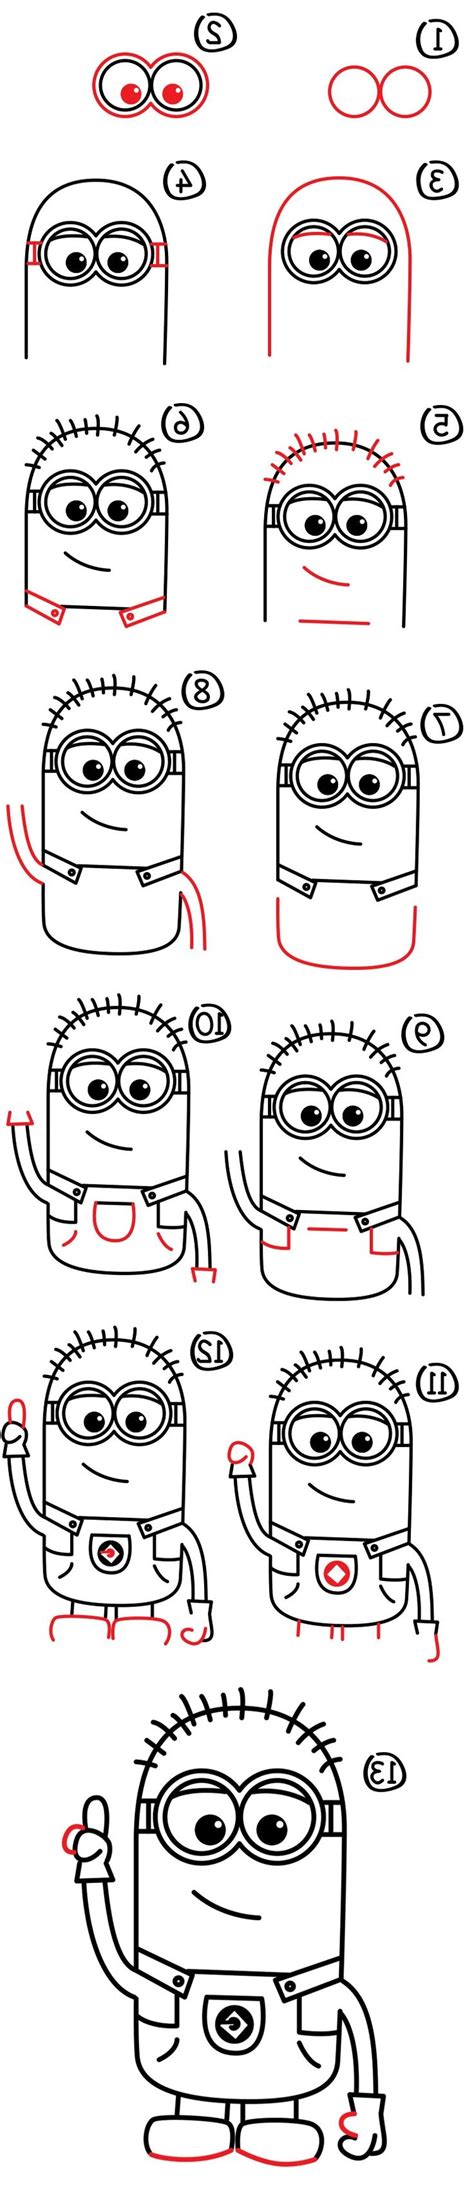 20 easy drawing tutorials for beginners cool things to draw step by step do it before me